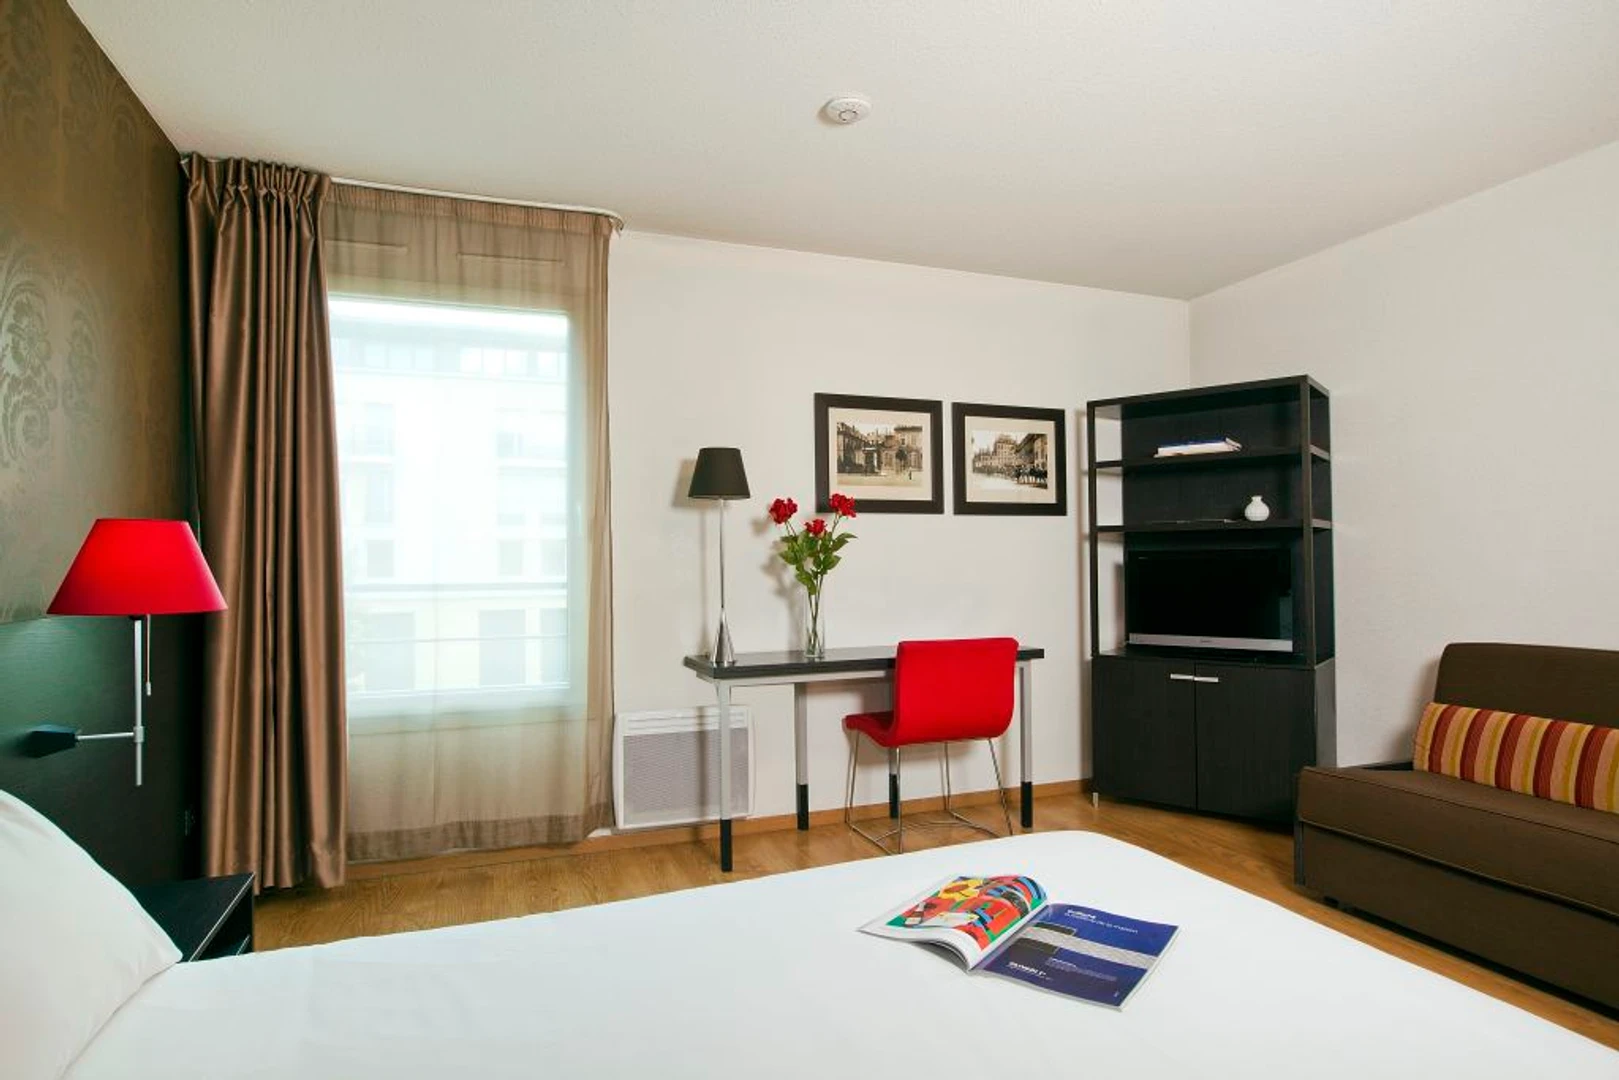 Accommodation in the centre of Metz